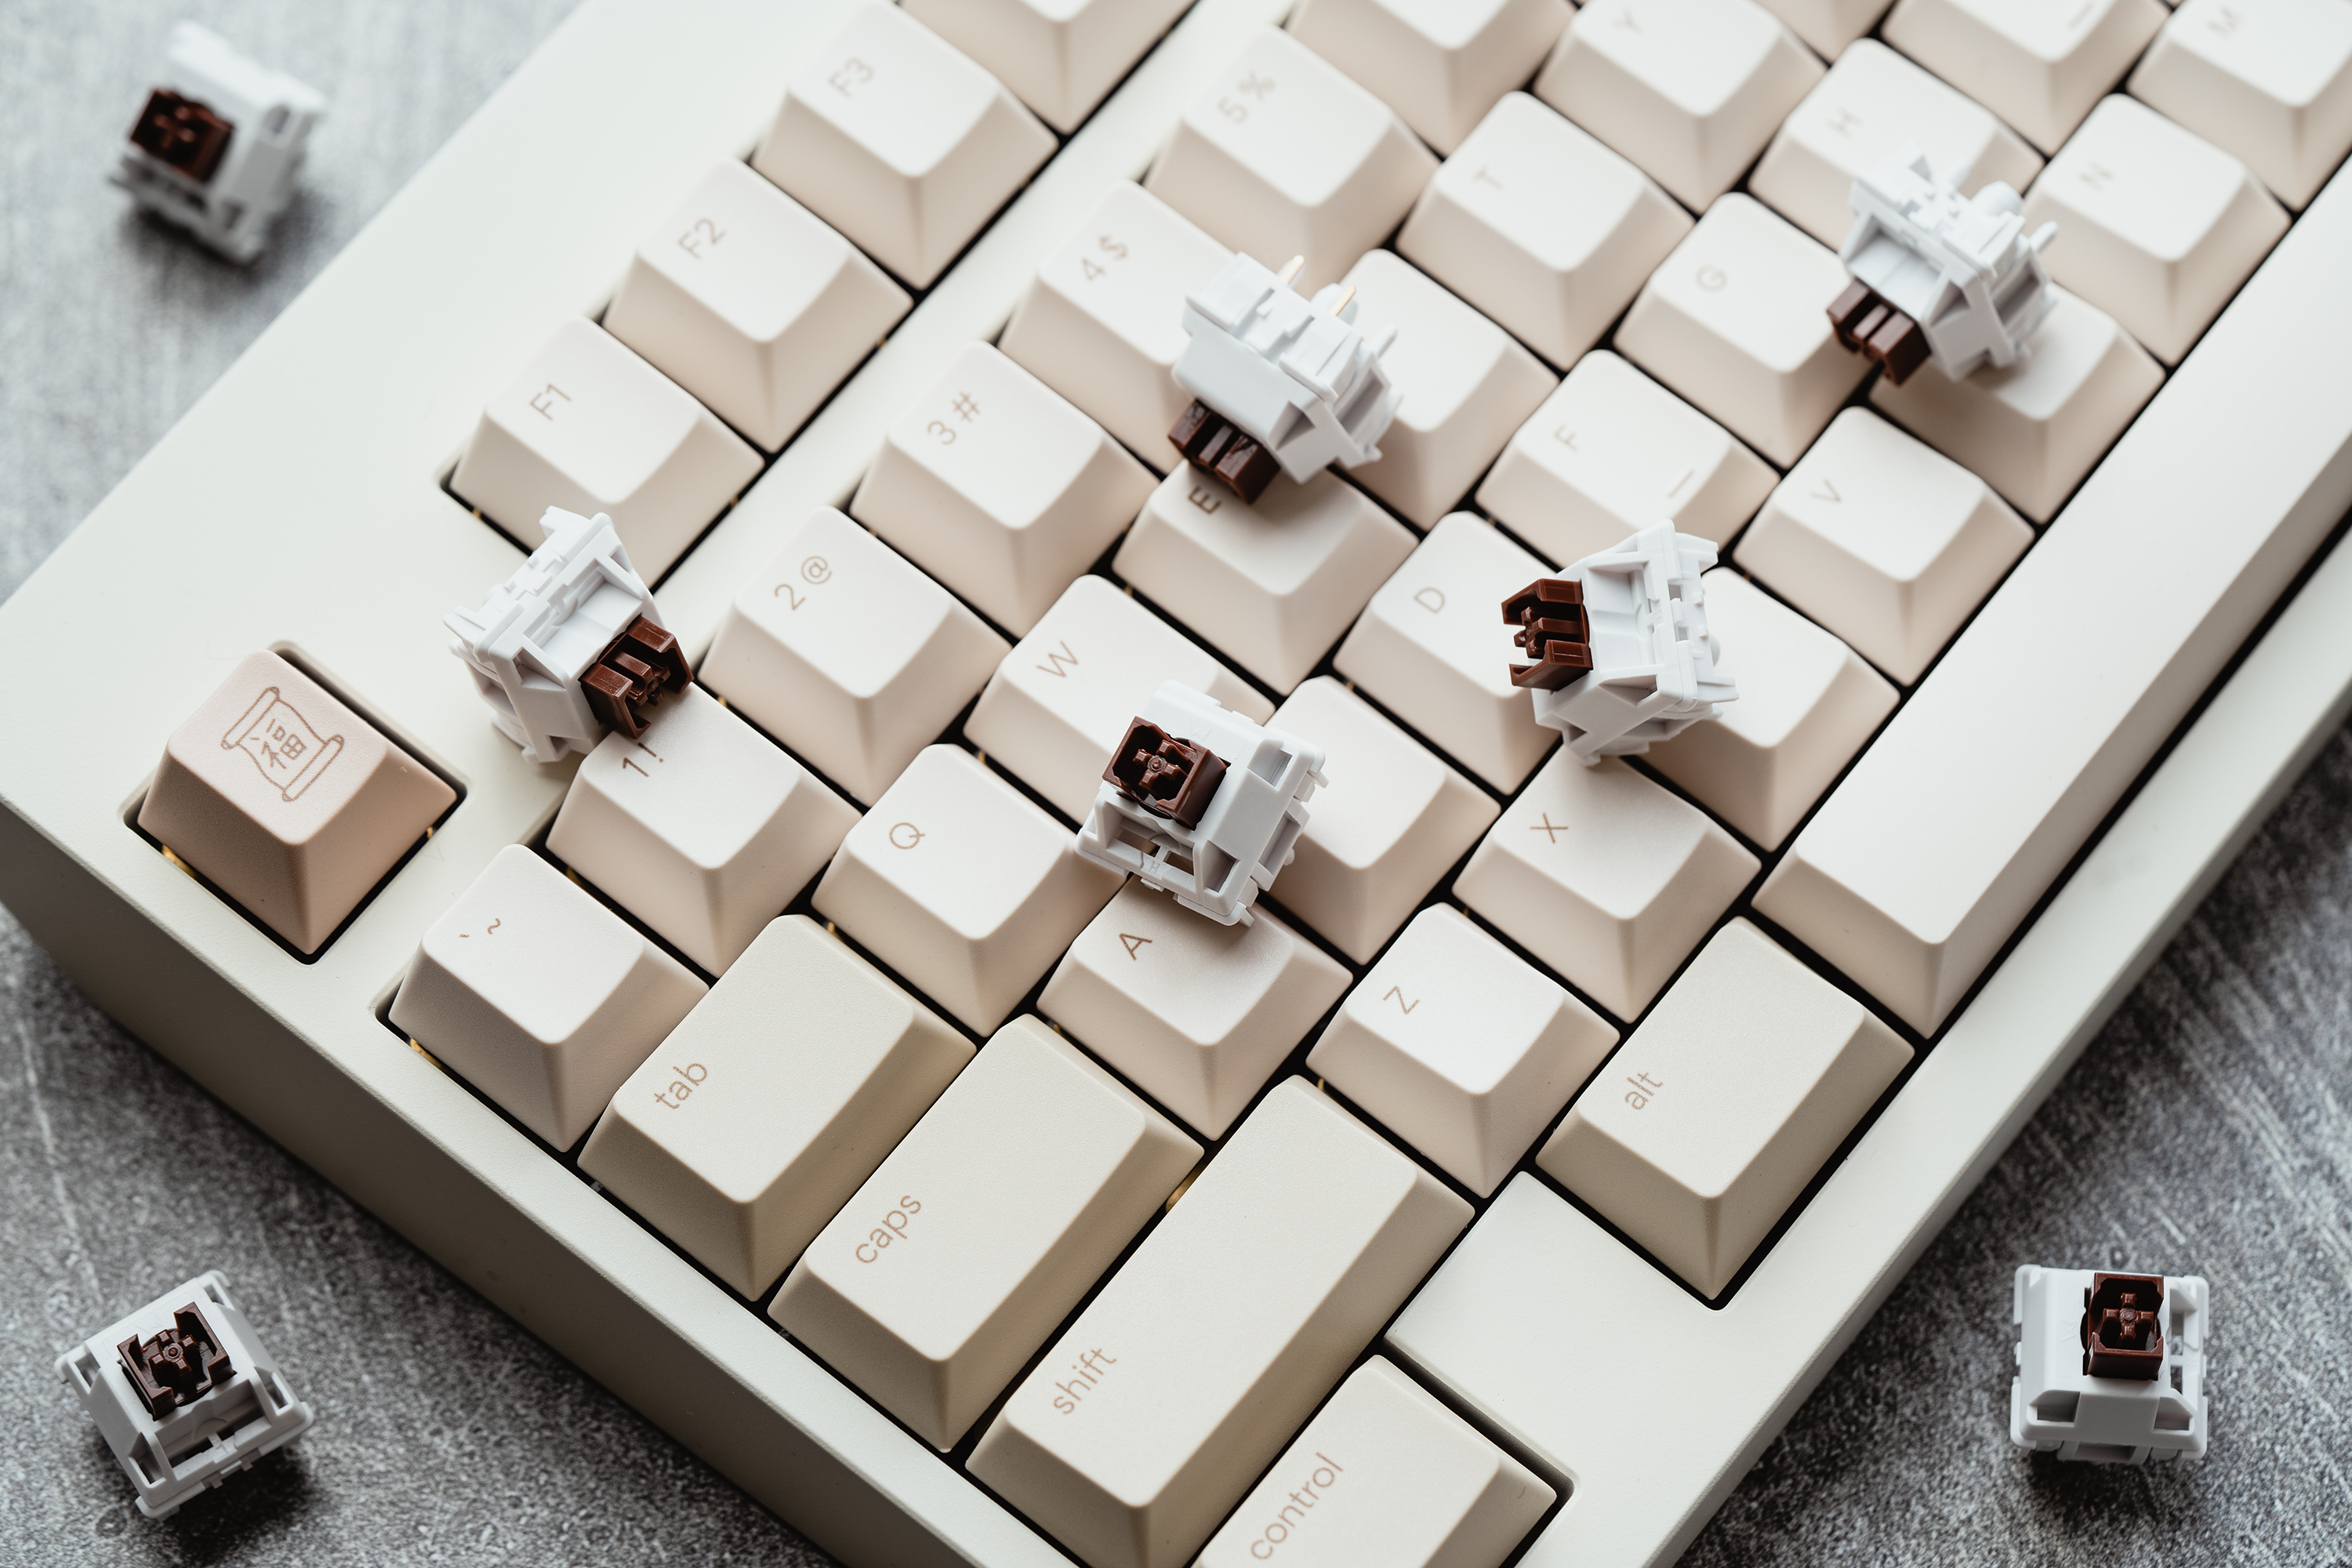 Wuque WS Brown Tactile Switches